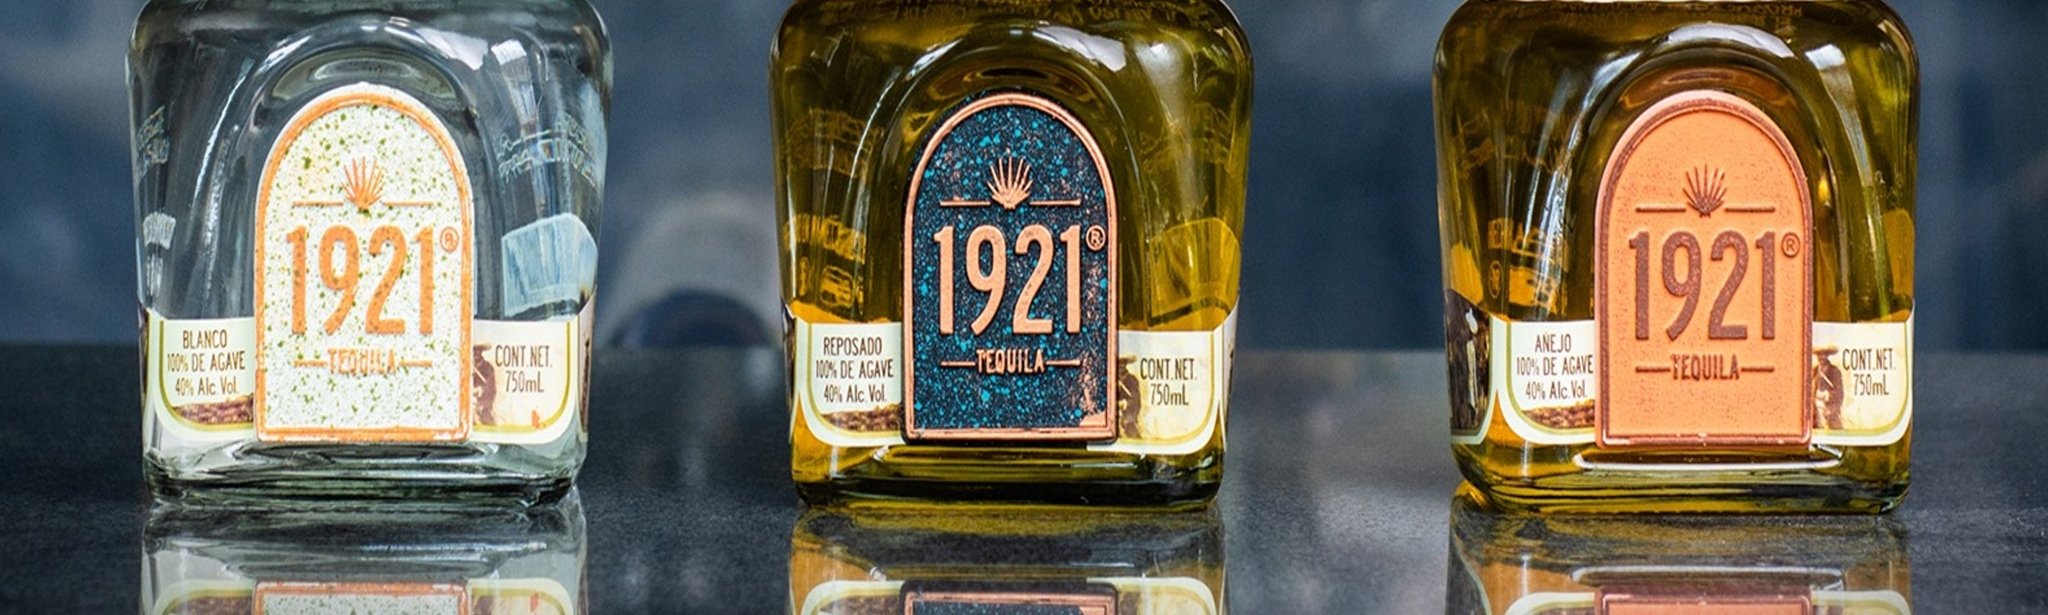 1921 - The Bottle Club